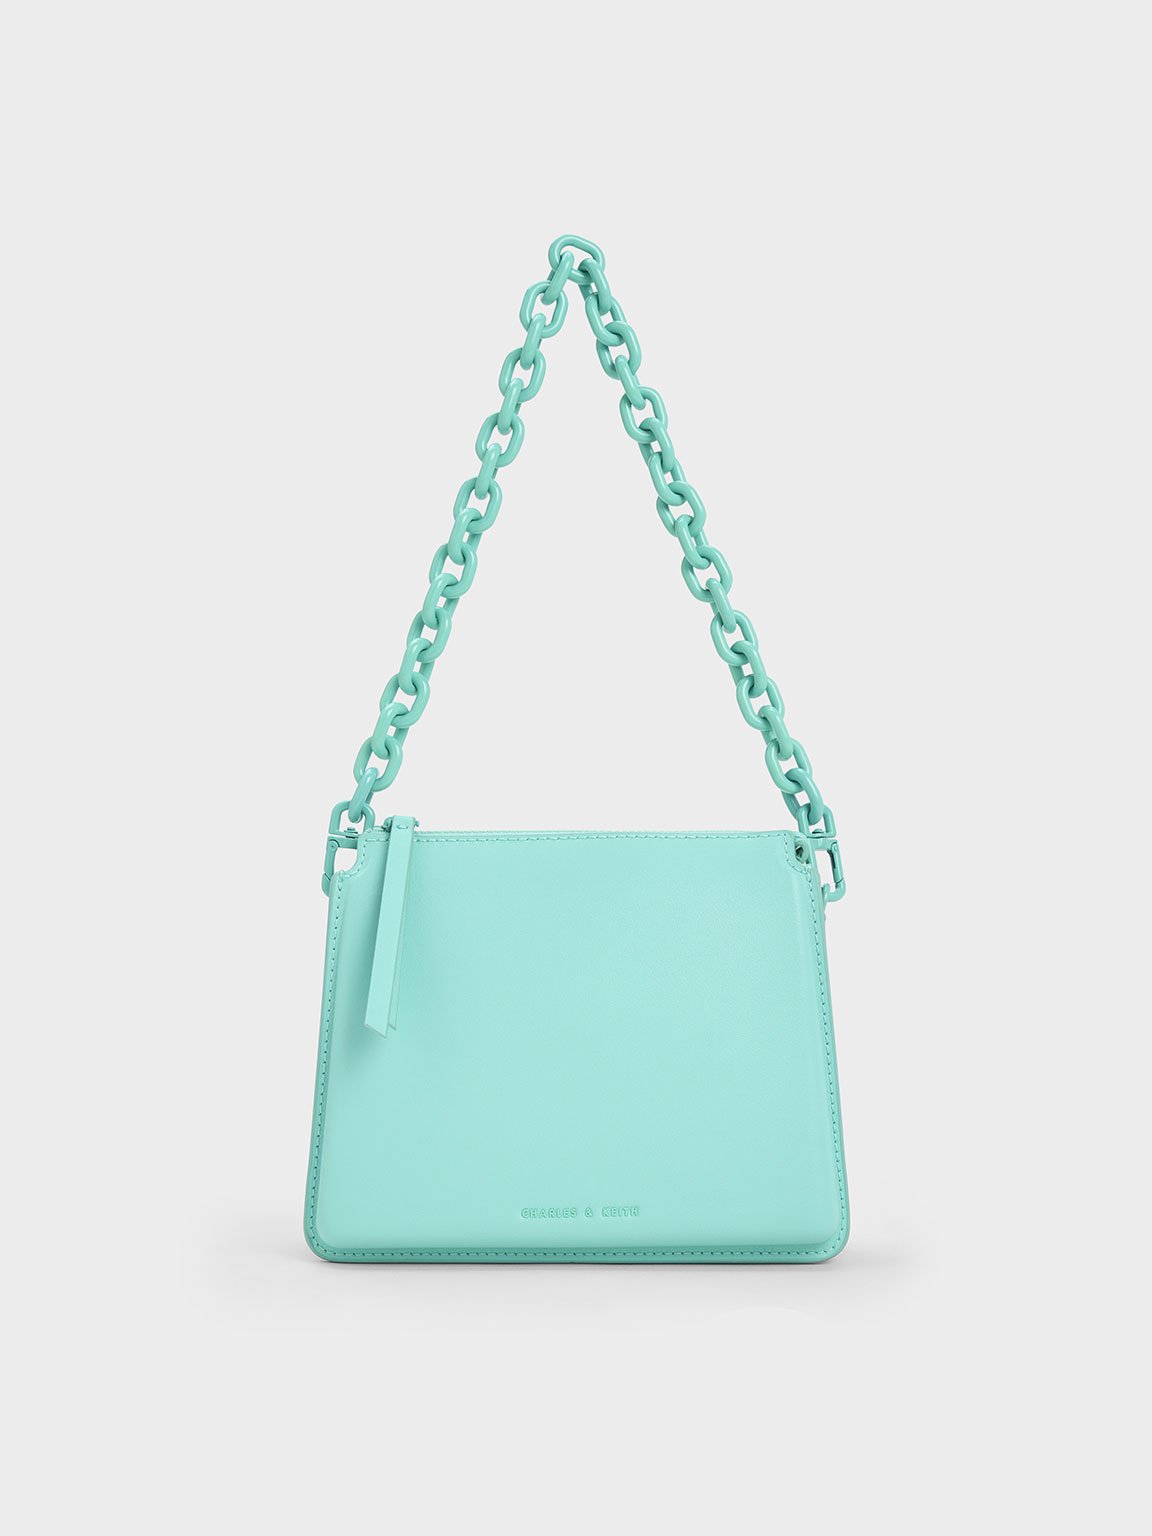 Charles & Keith Camelia Trapeze Crossbody Bag In Turquoise